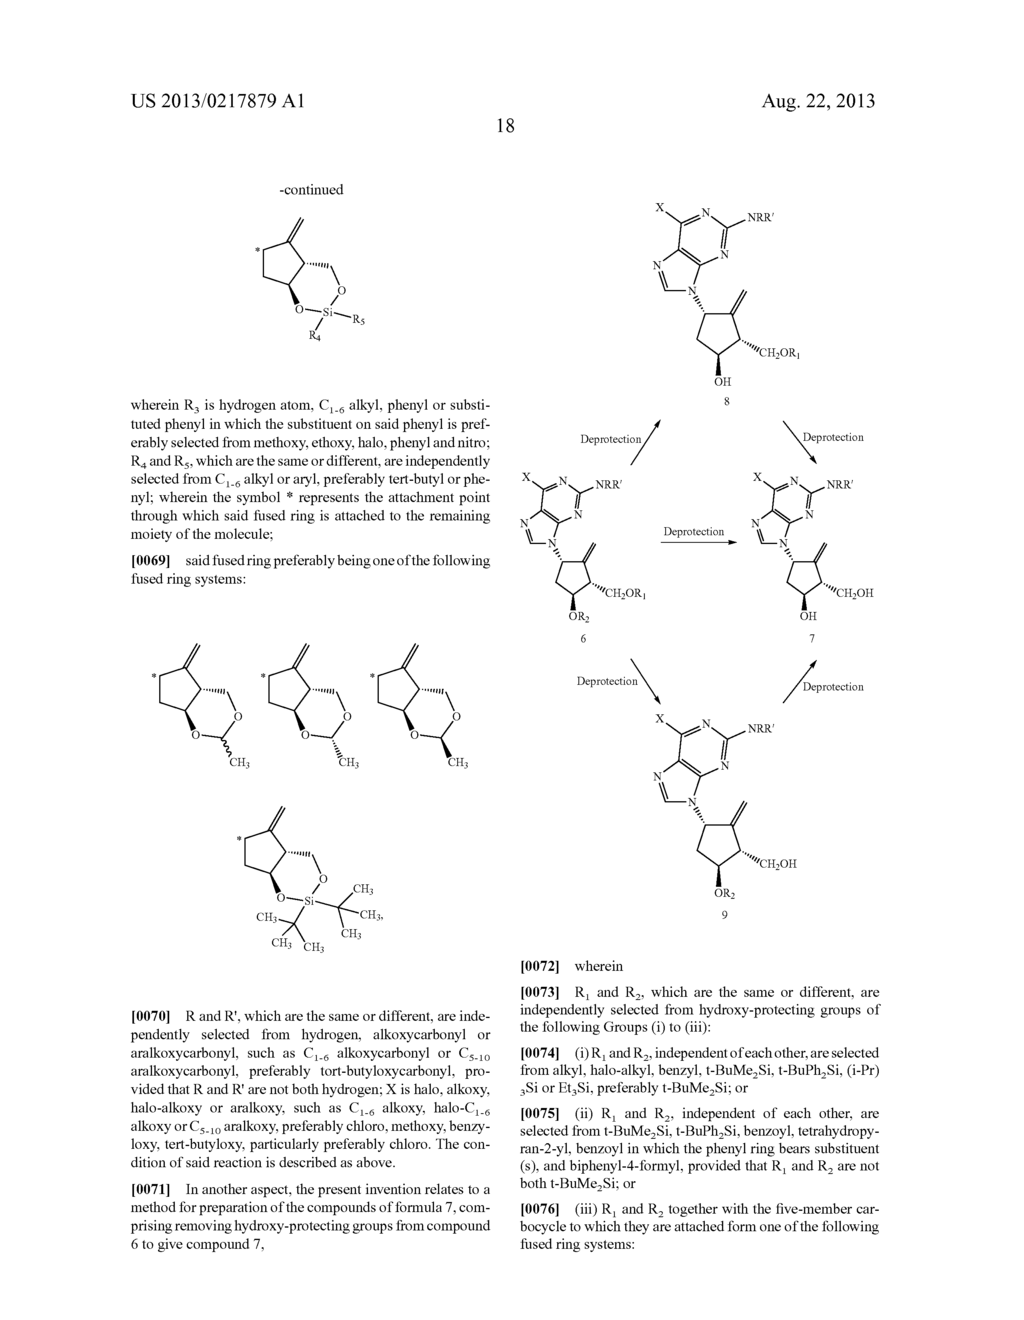 ENTECAVIR SYNTHESIS METHOD AND INTERMEDIATE COMPOUND THEREOF - diagram, schematic, and image 19